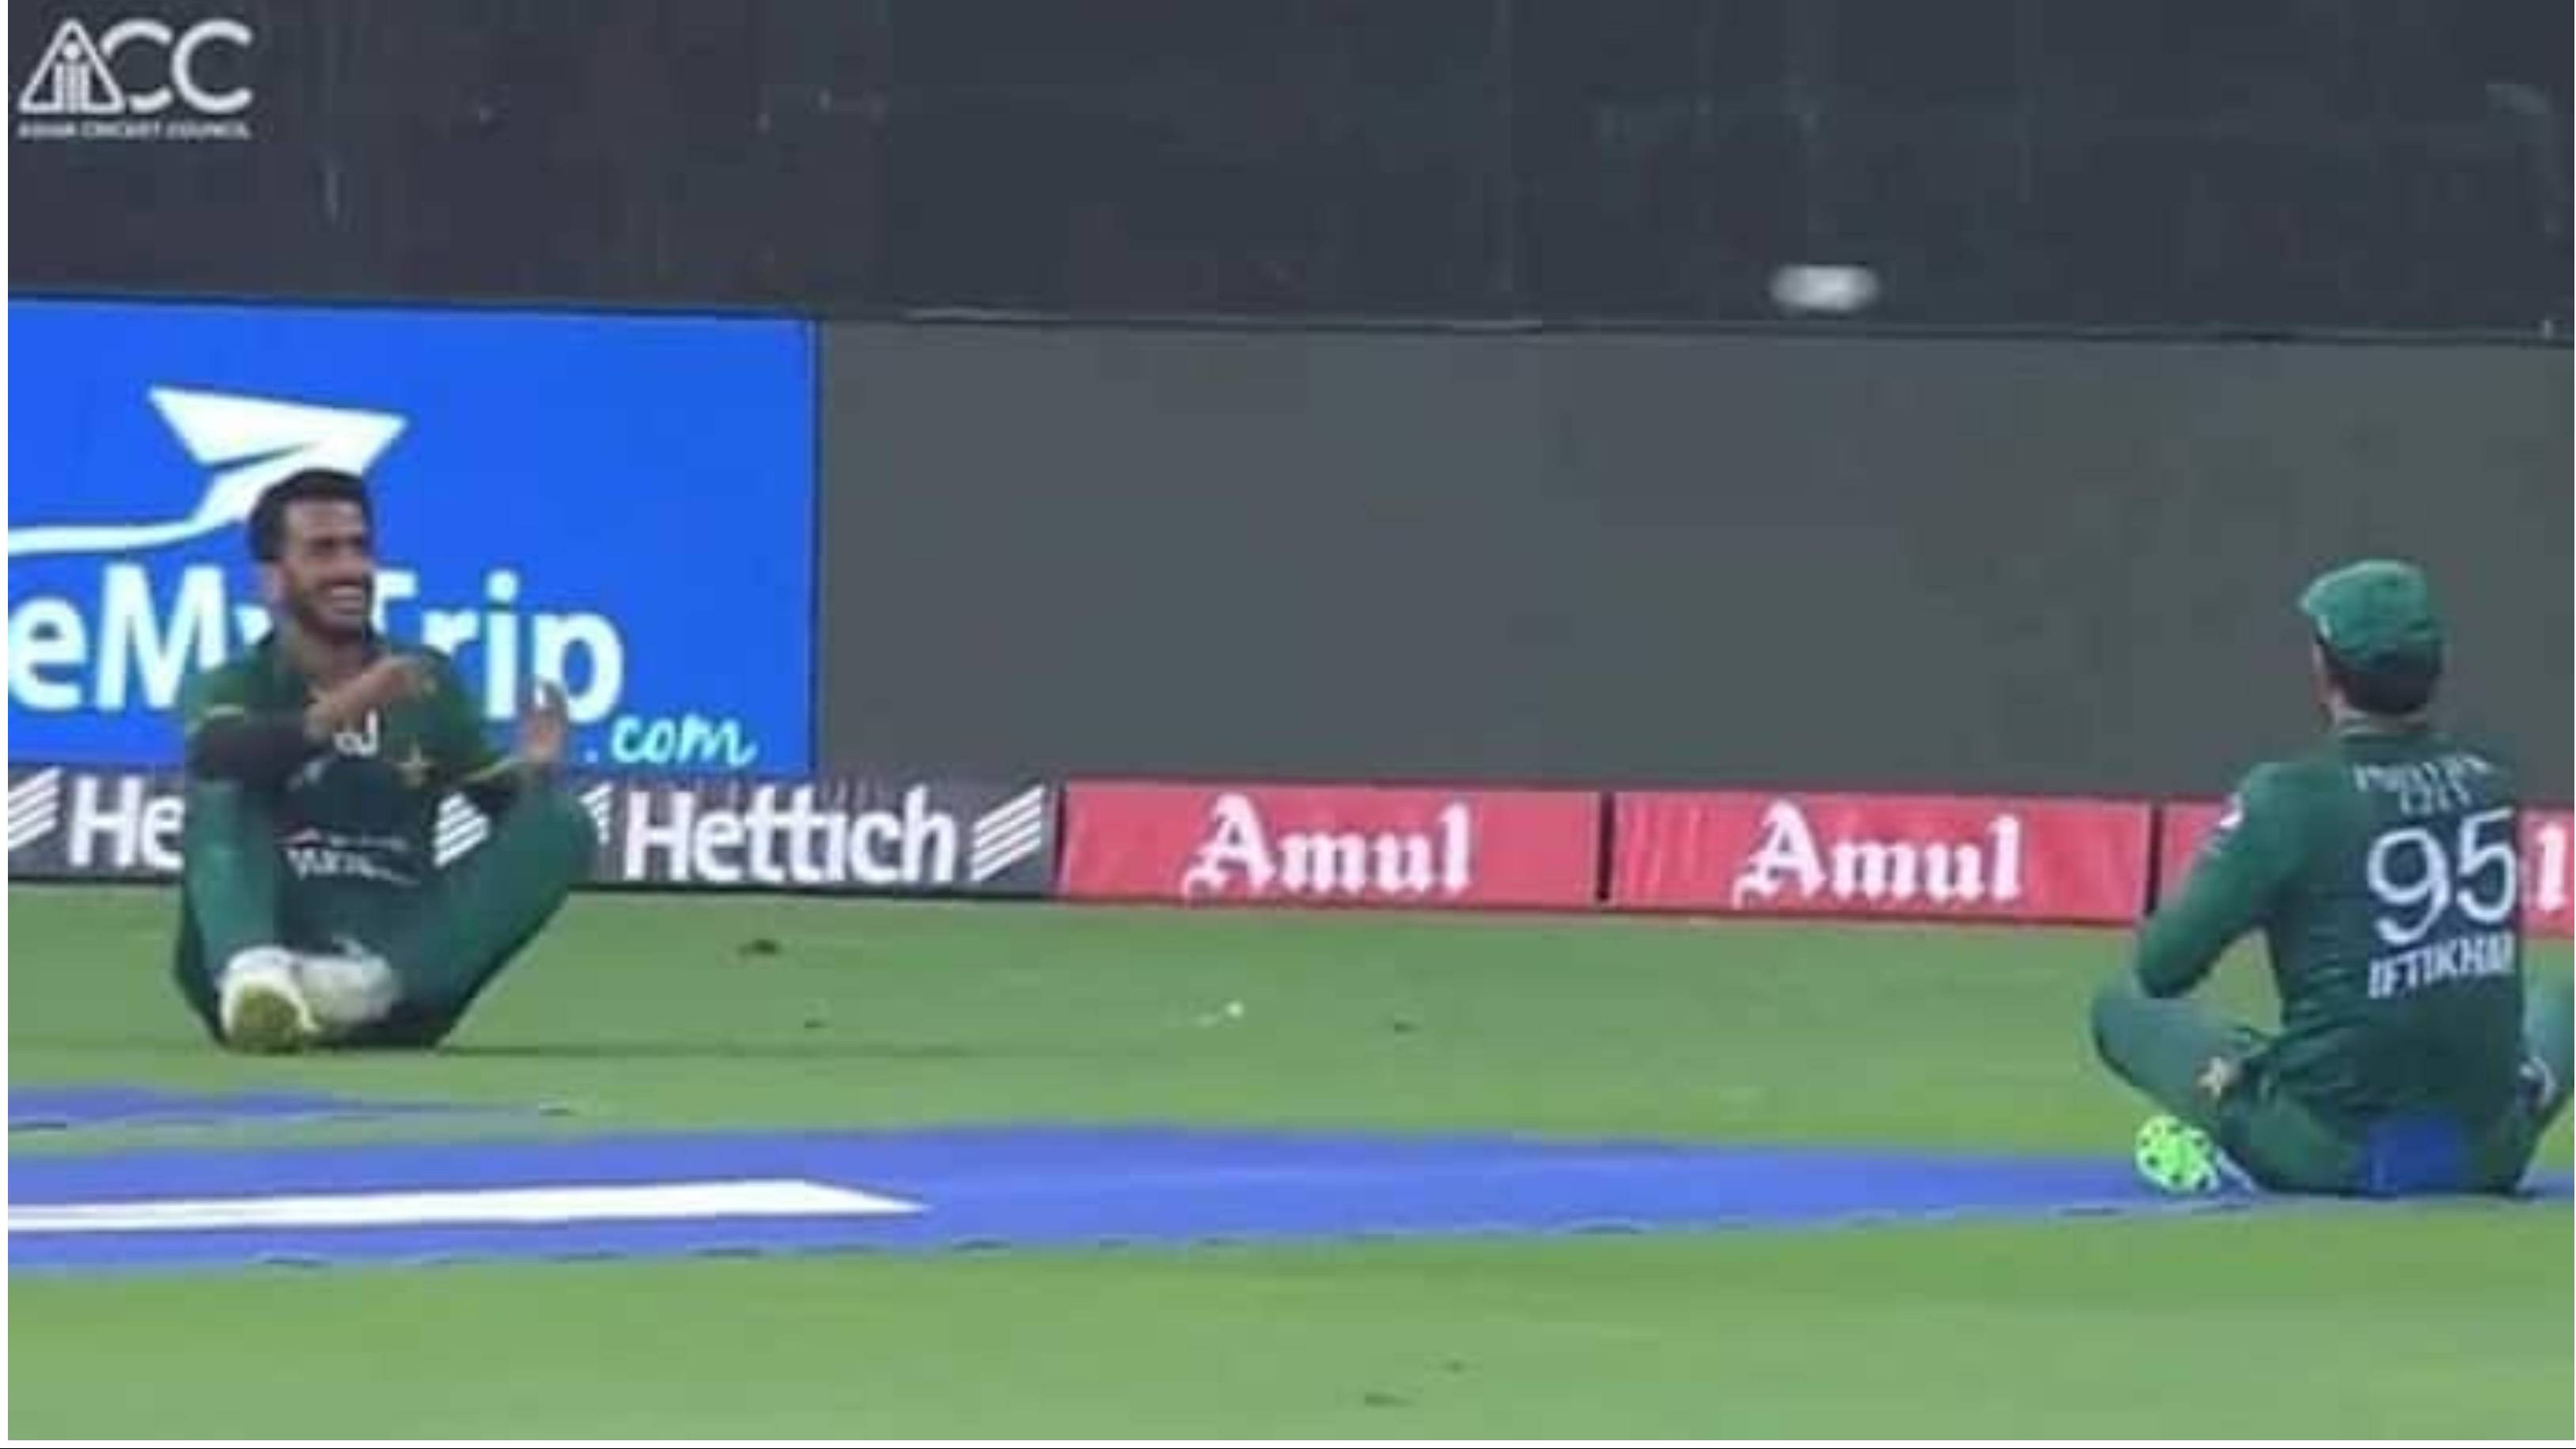 Asia Cup 2022: WATCH – Hasan Ali plays catch-catch with Iftikhar Ahmed after avoiding collision vs Sri Lanka